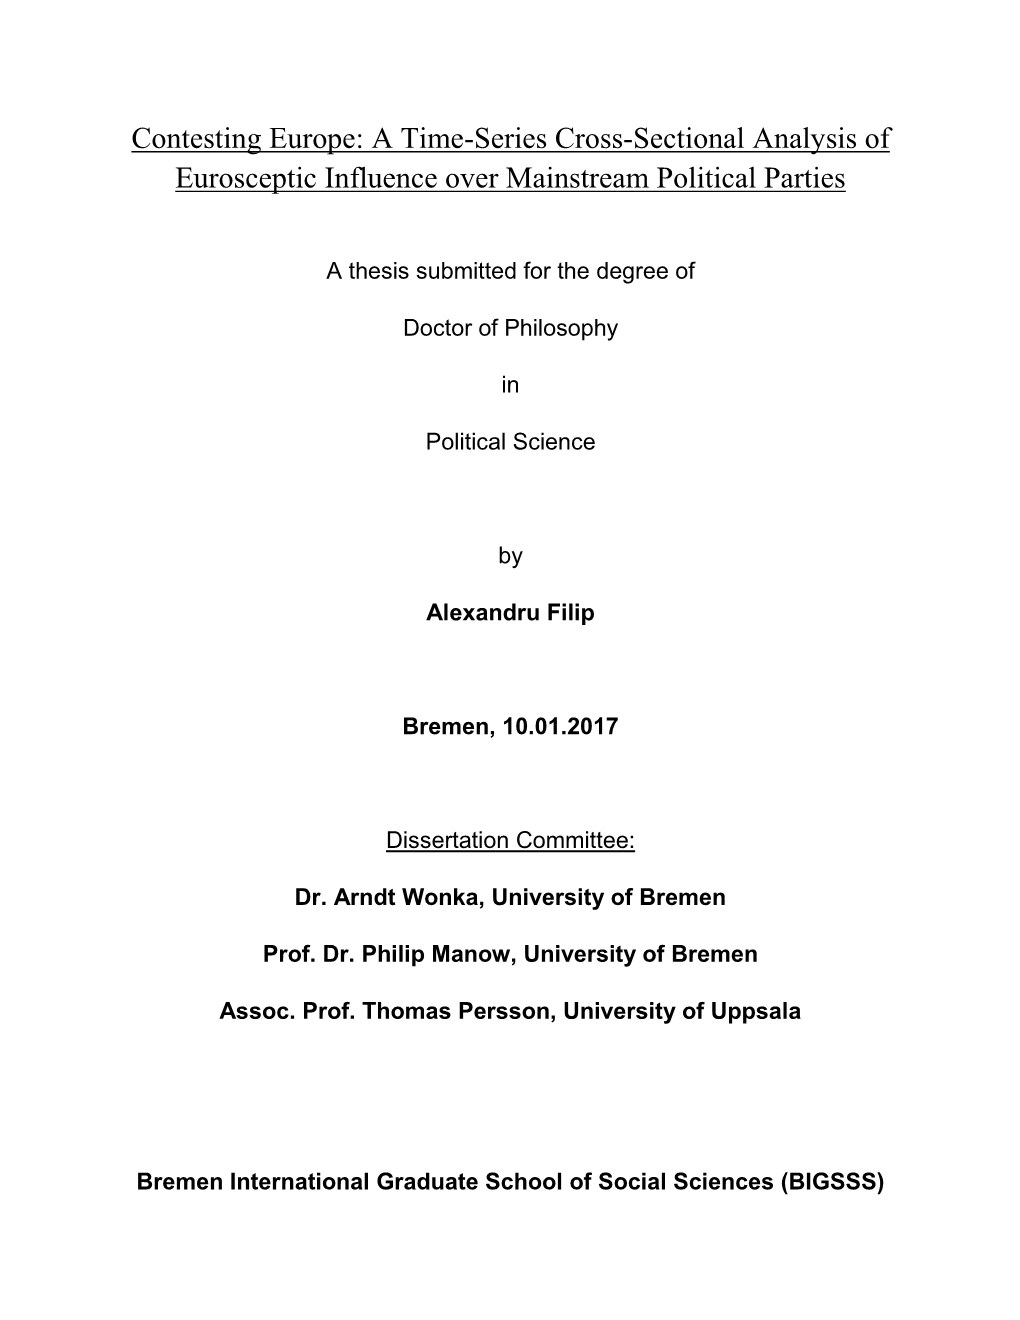 A Time-Series Cross-Sectional Analysis of Eurosceptic Influence Over Mainstream Political Parties